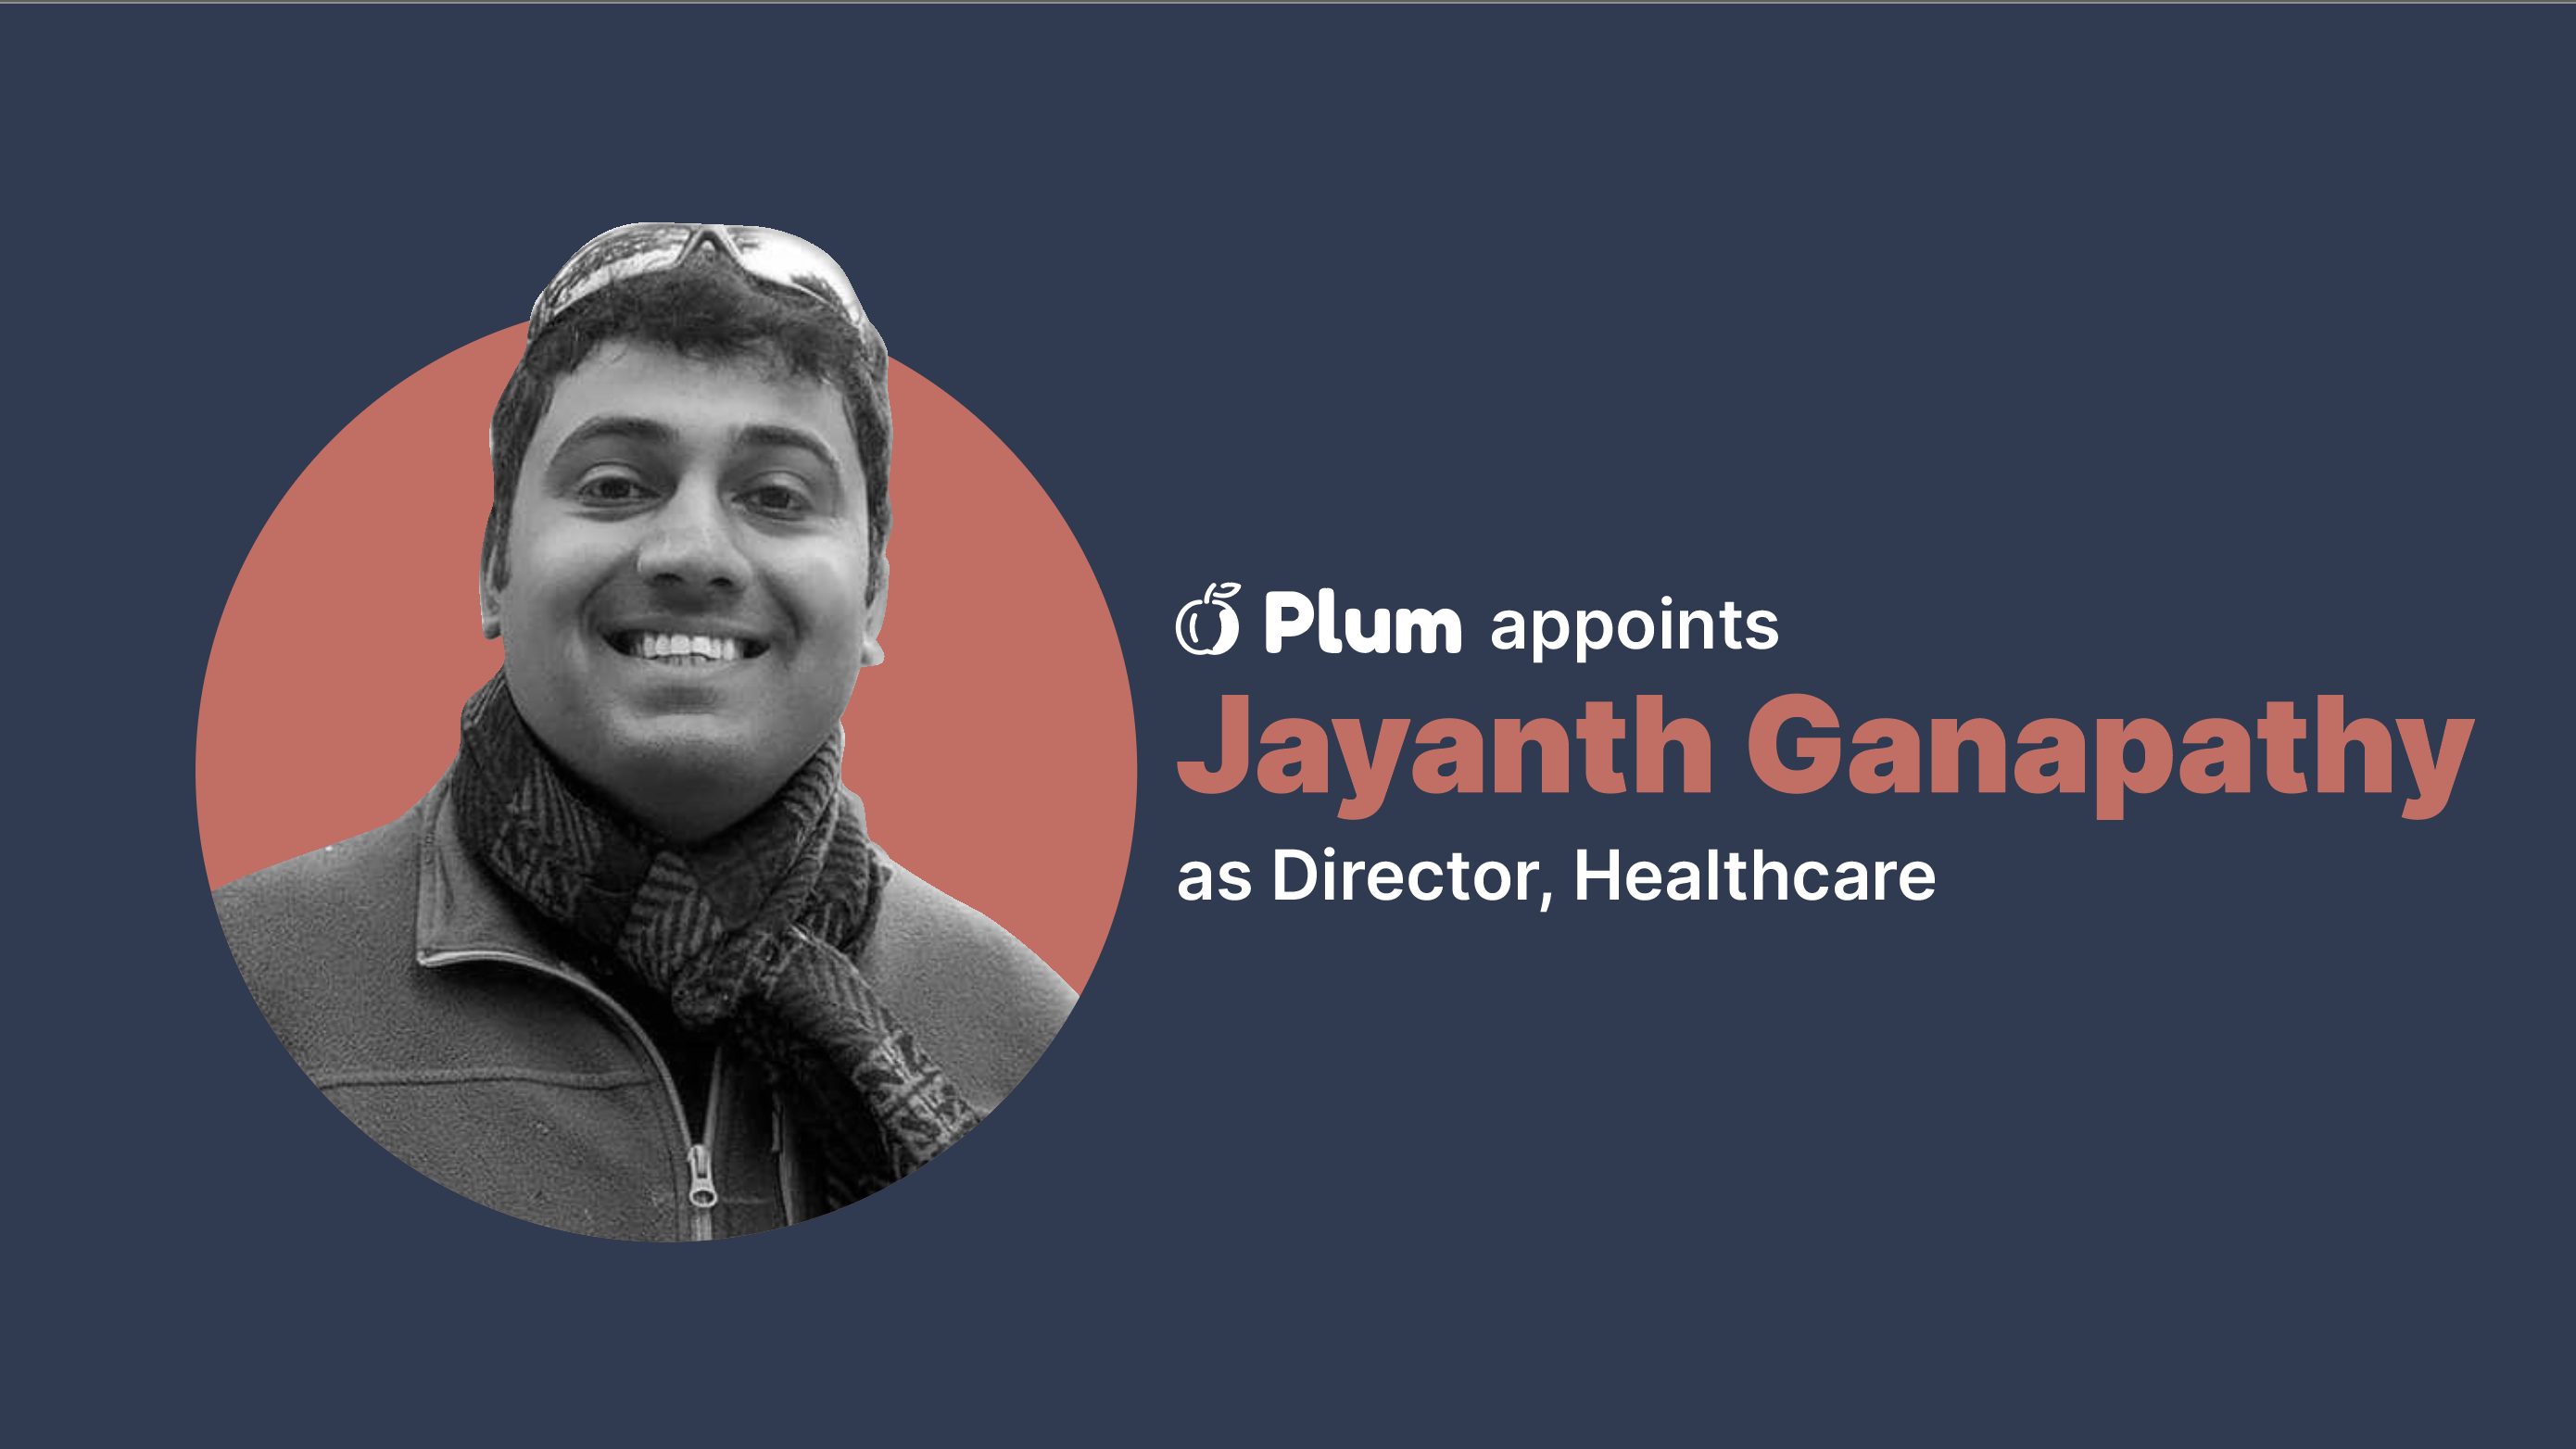 Plum appoints Jayanth Ganapathy as Director, Healthcare decoding=